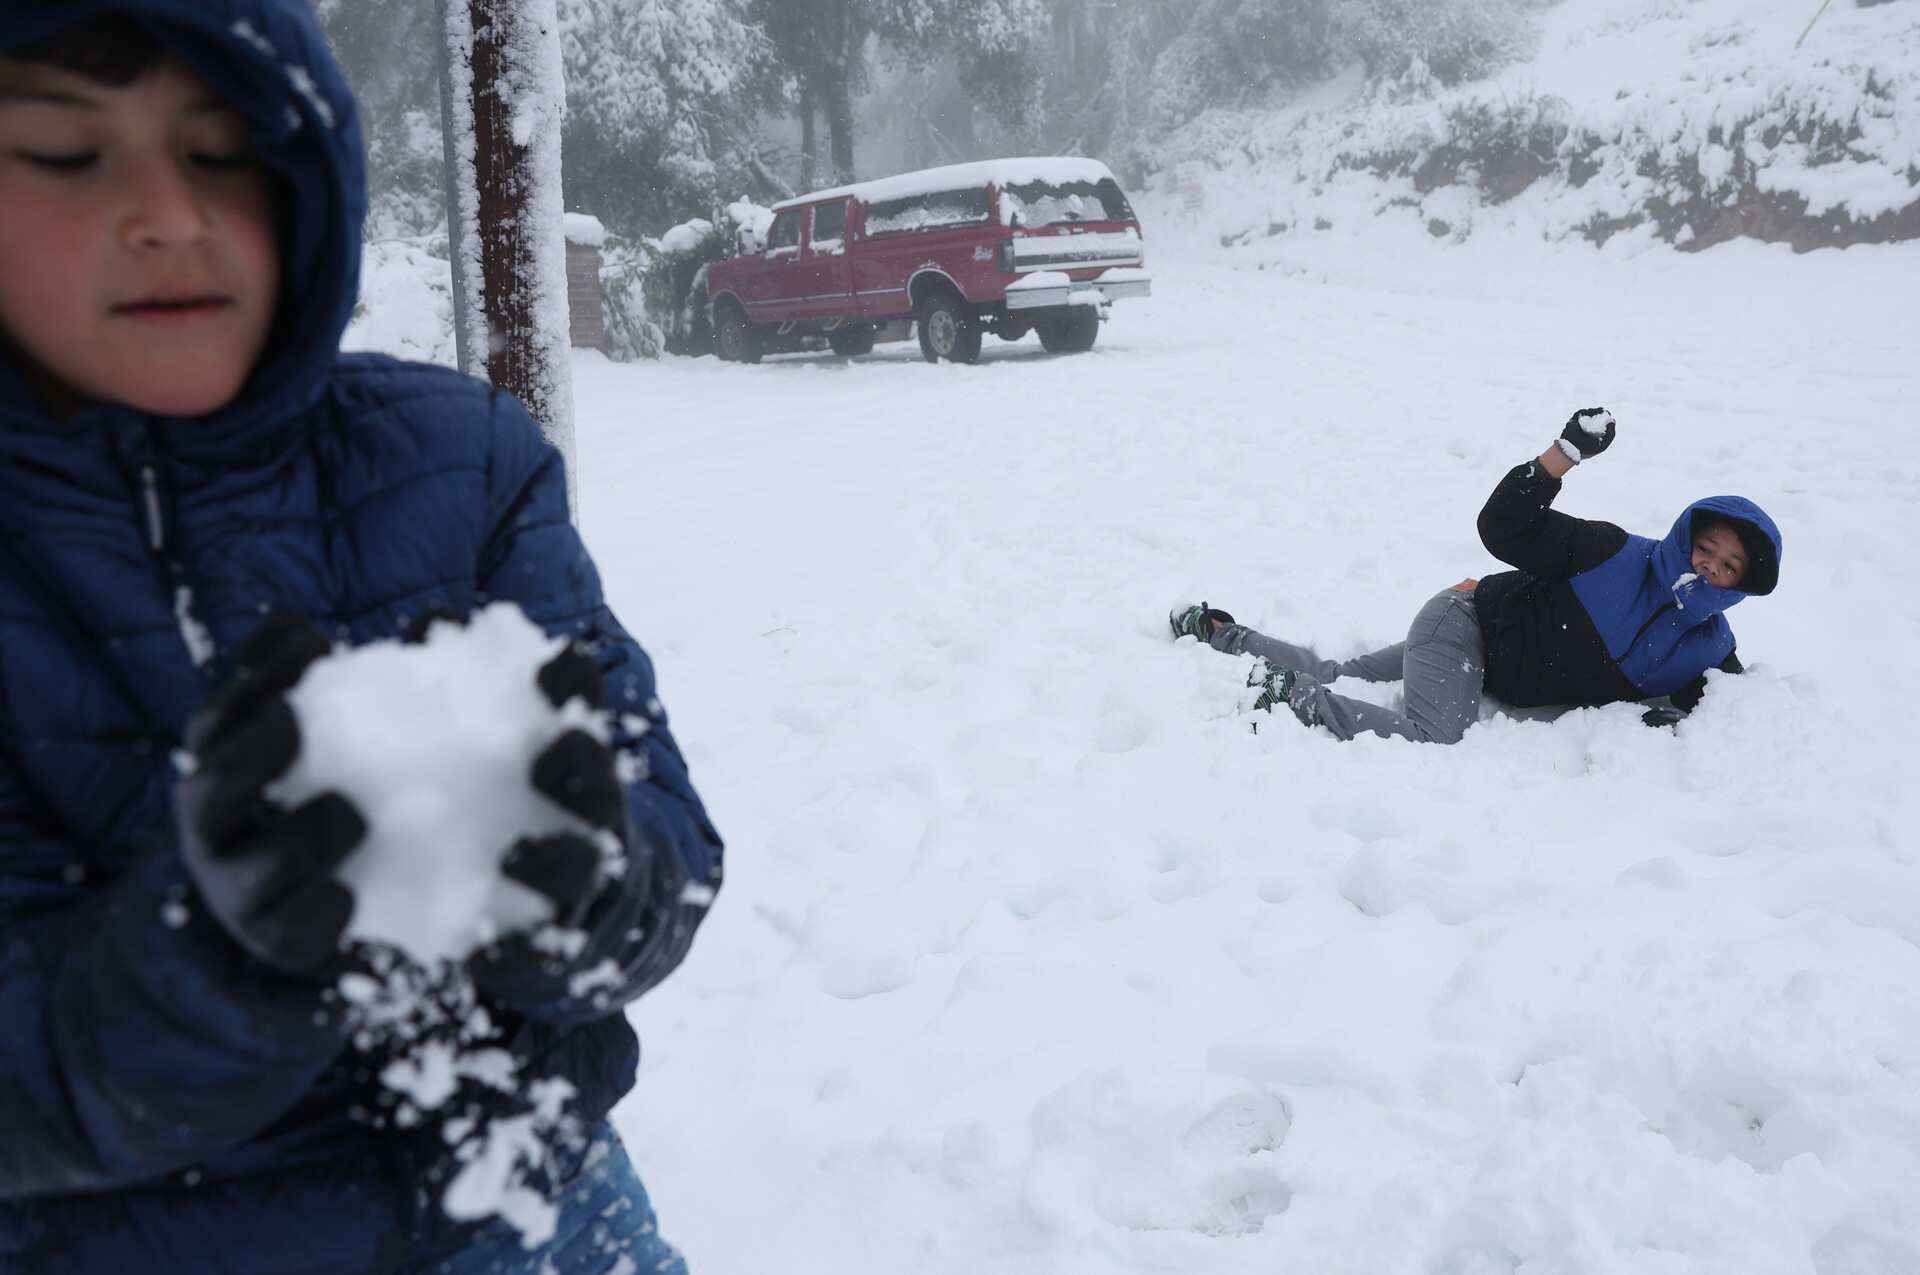 two children wearing blue coats have a snowball fight - one in the foreground packs a snowball facing the camera as one in the background lies horizontal in the snow, which appears to be a foot deep